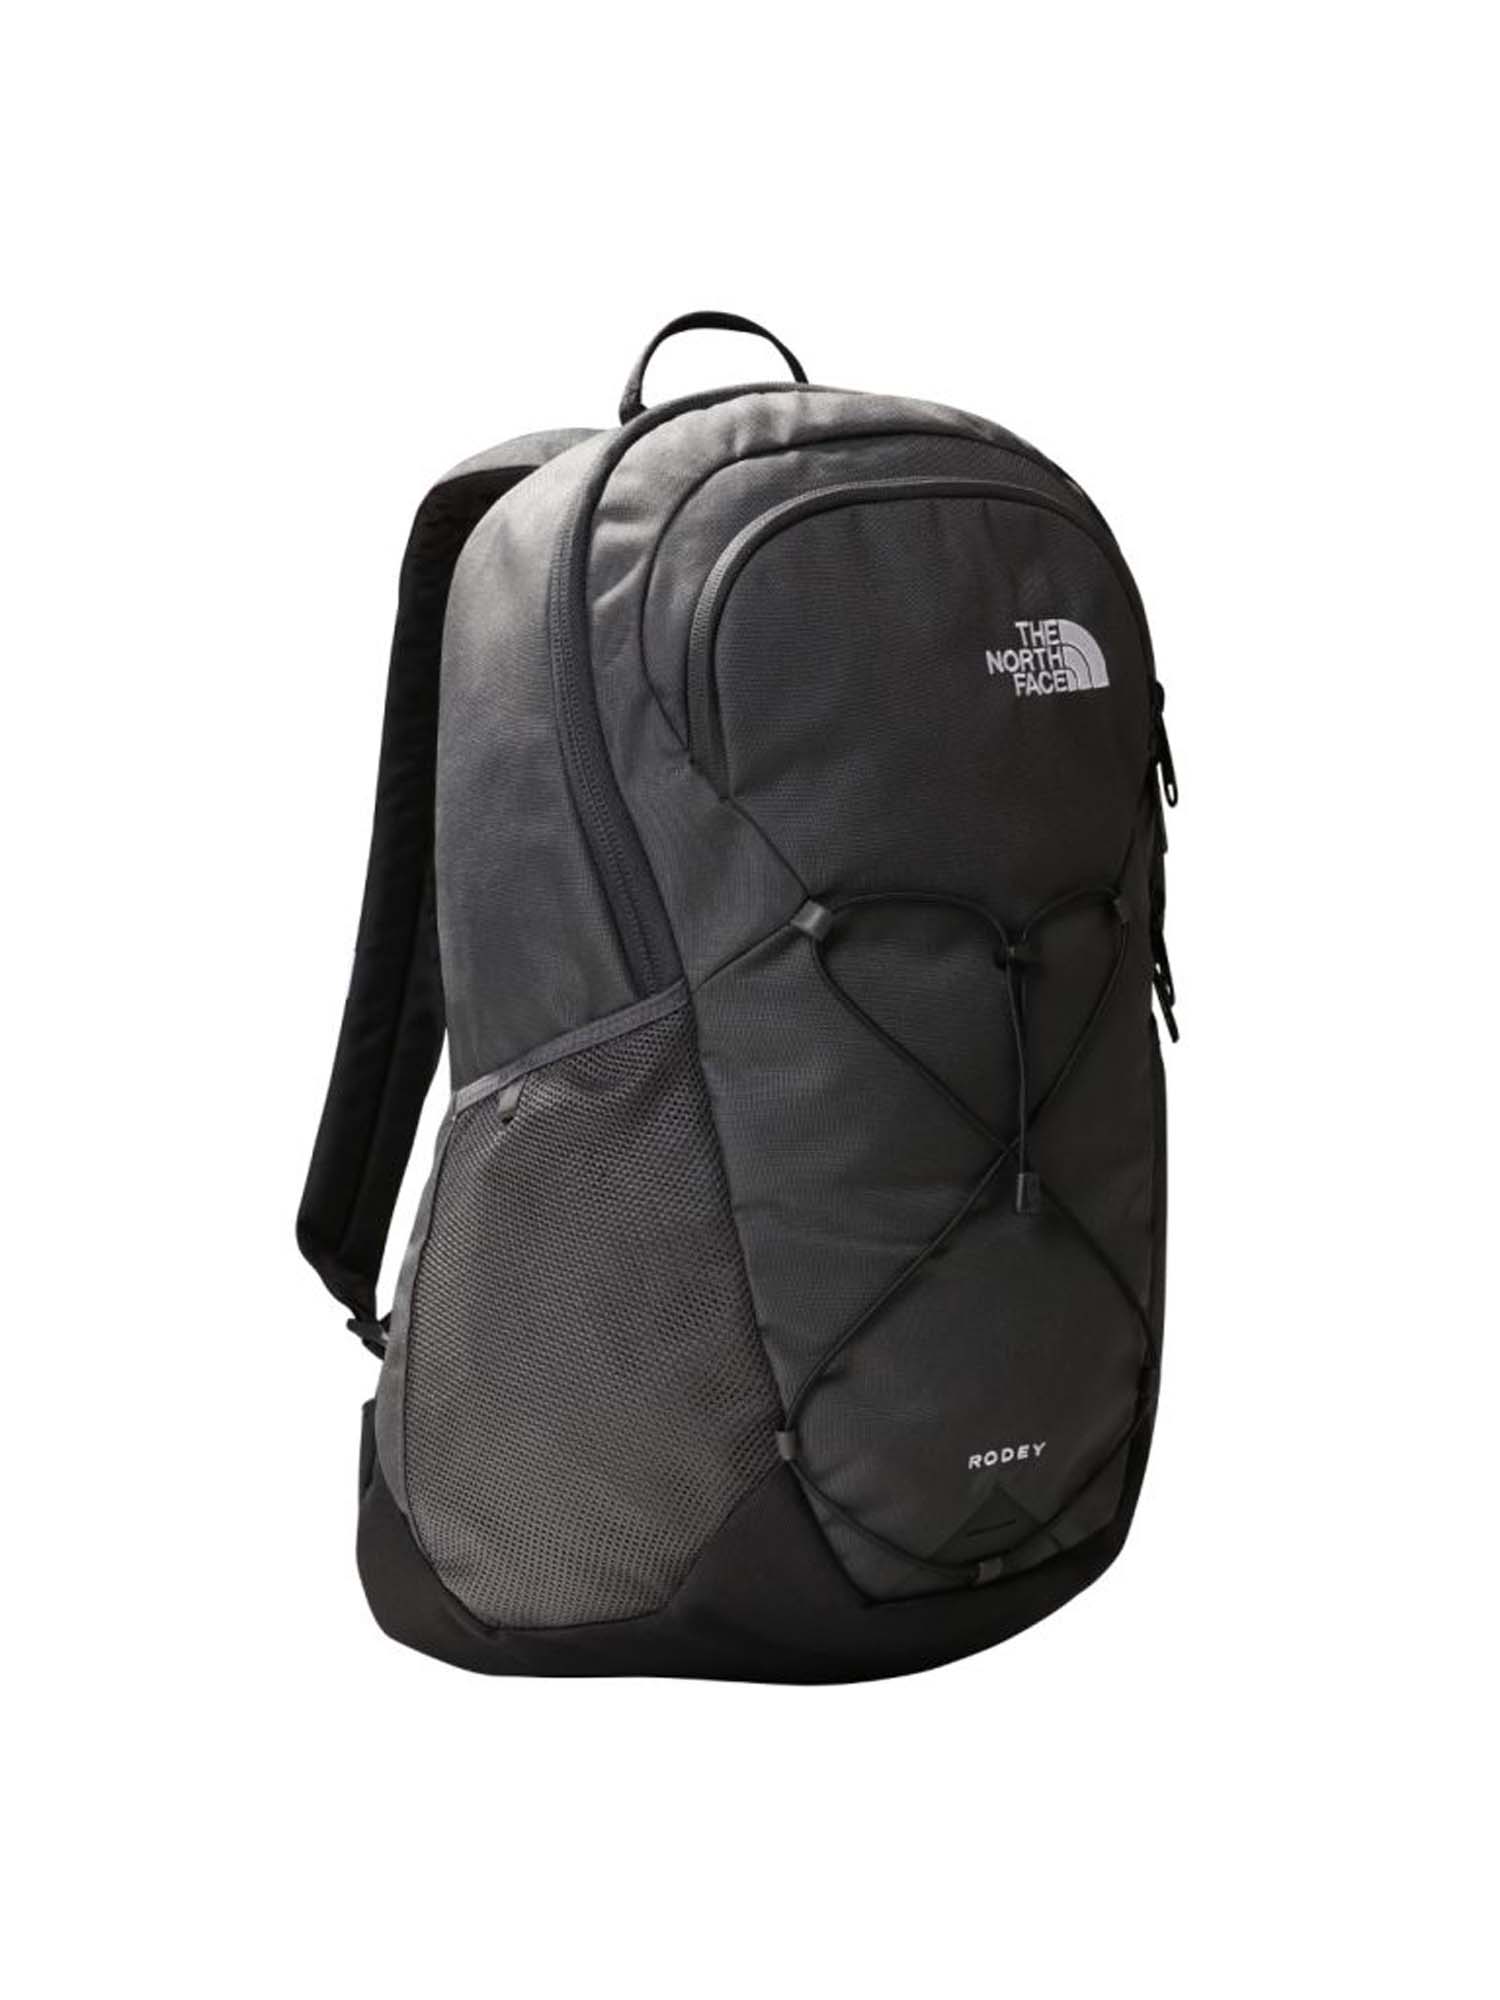 THE NORTH FACE Rodey